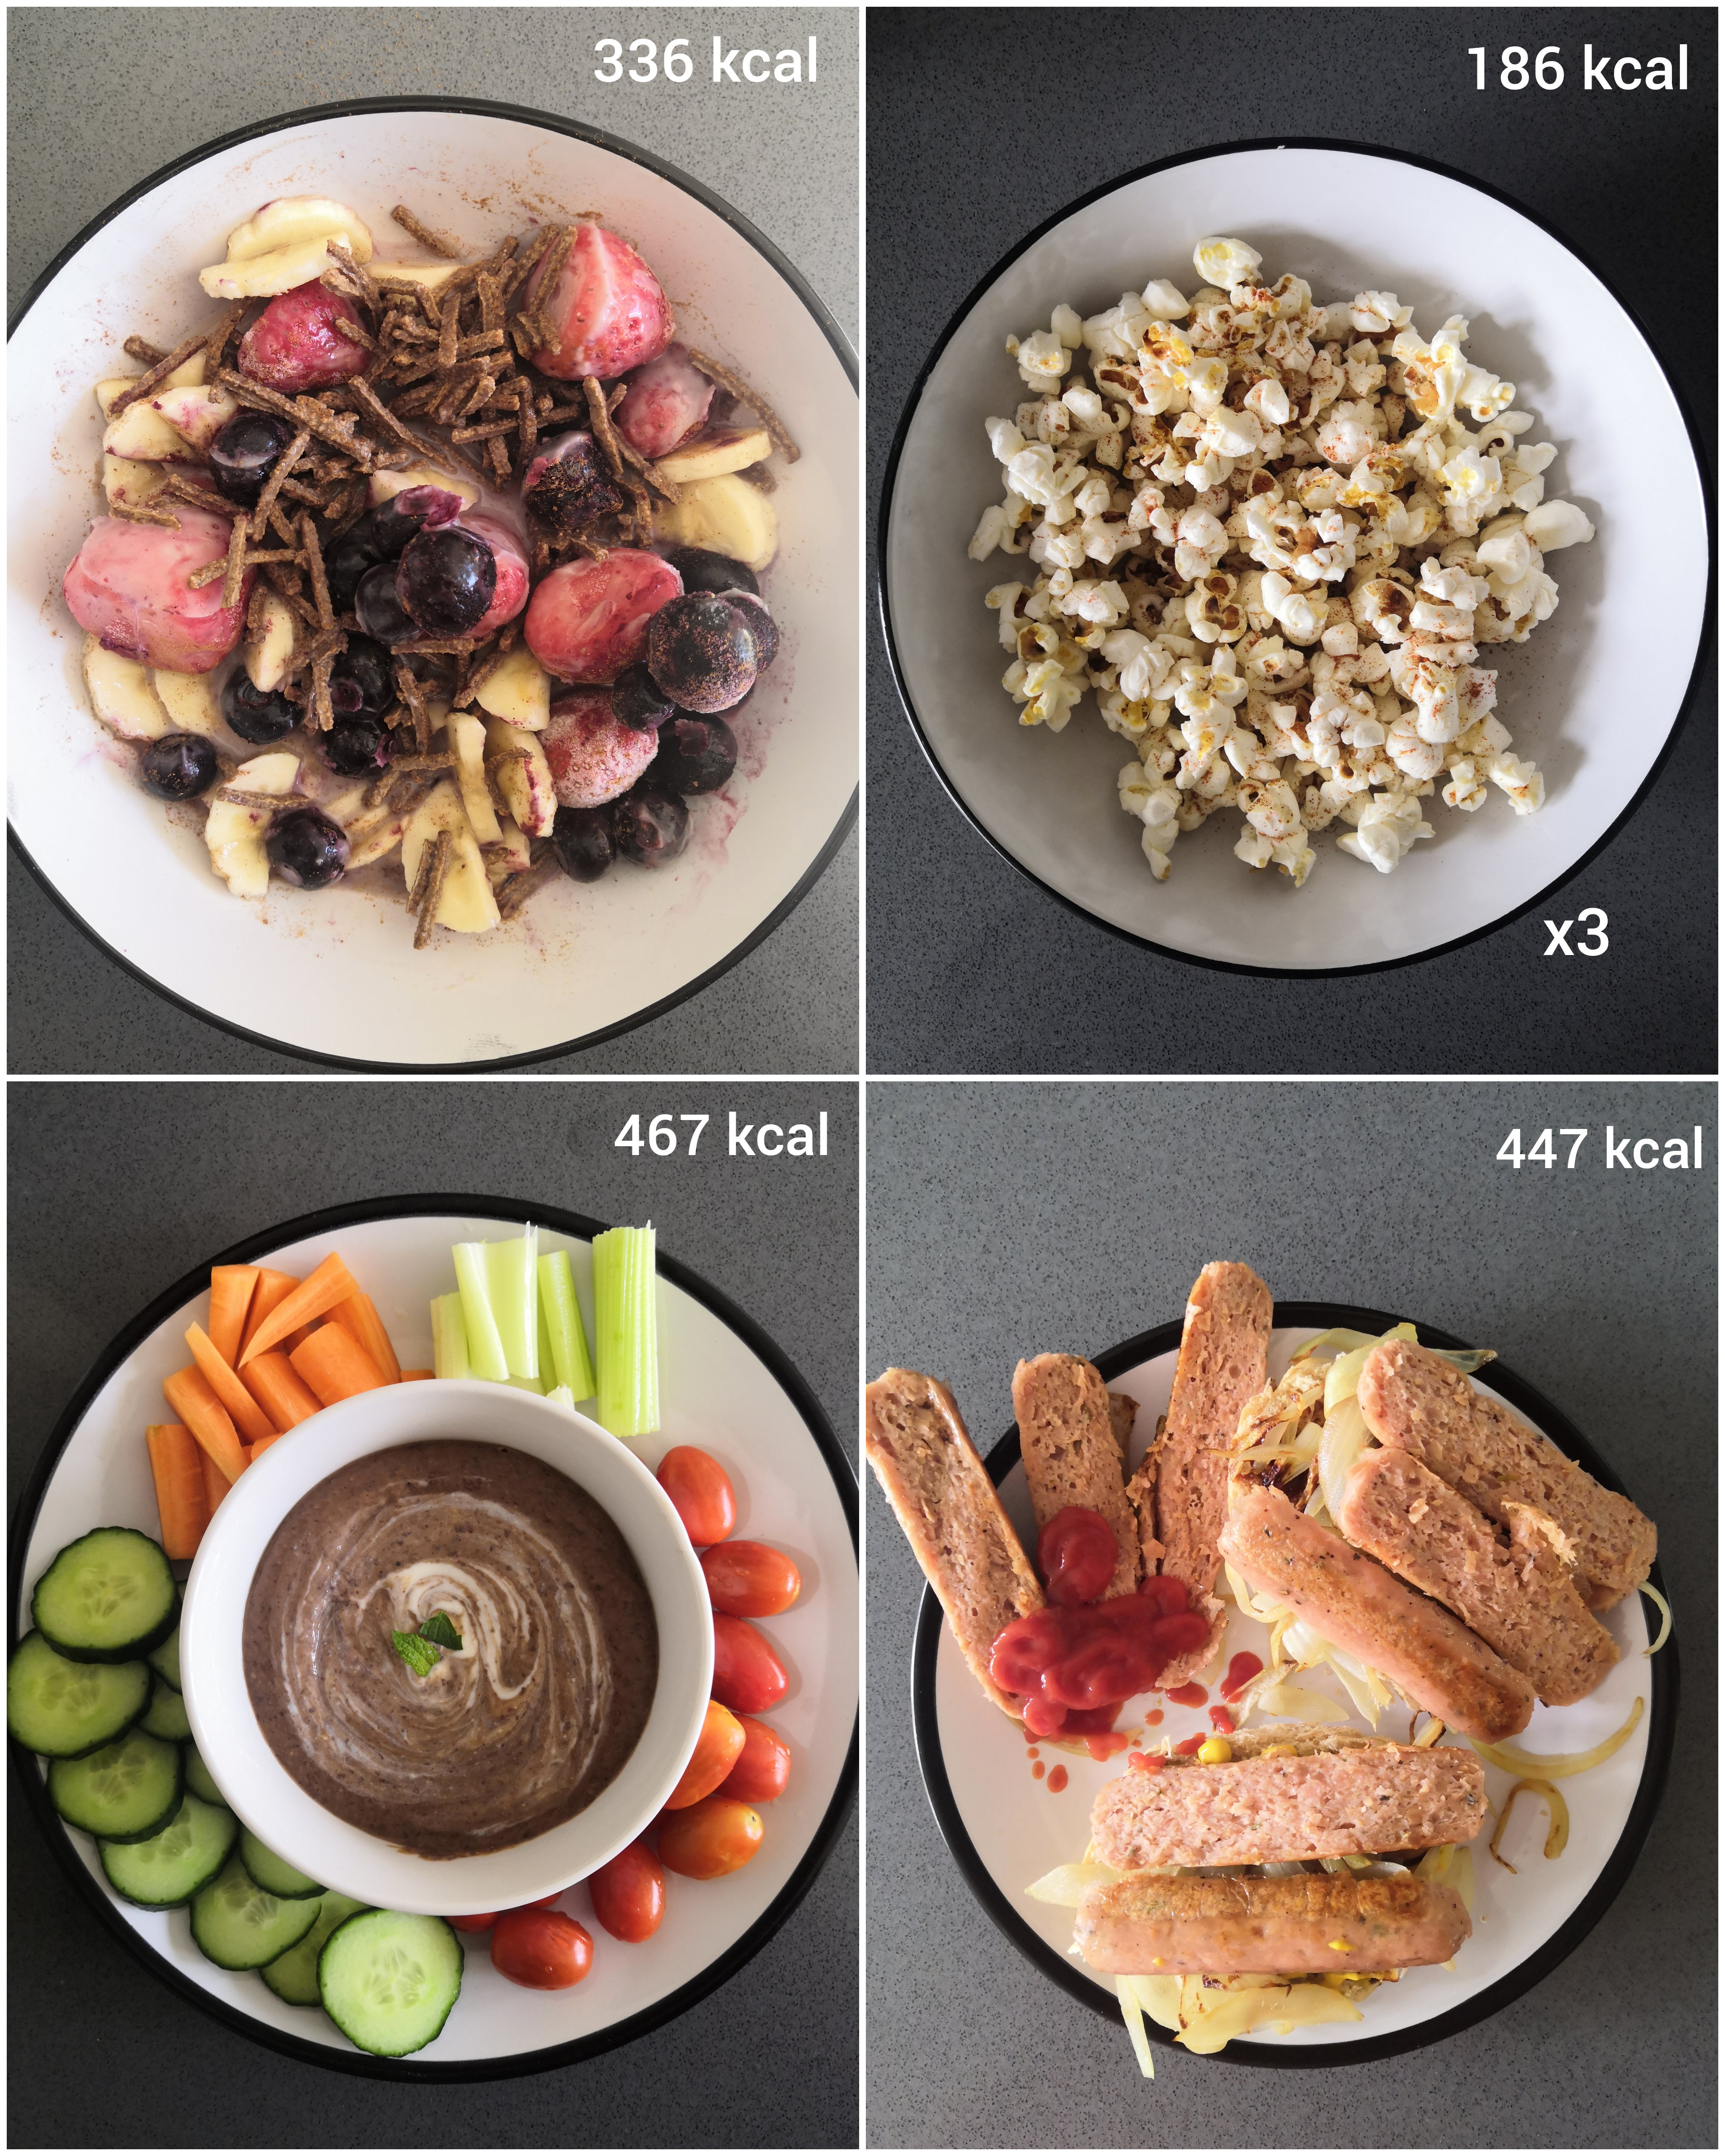 Meals for today (and some extra snacks) came to 1596 kcal in total ...